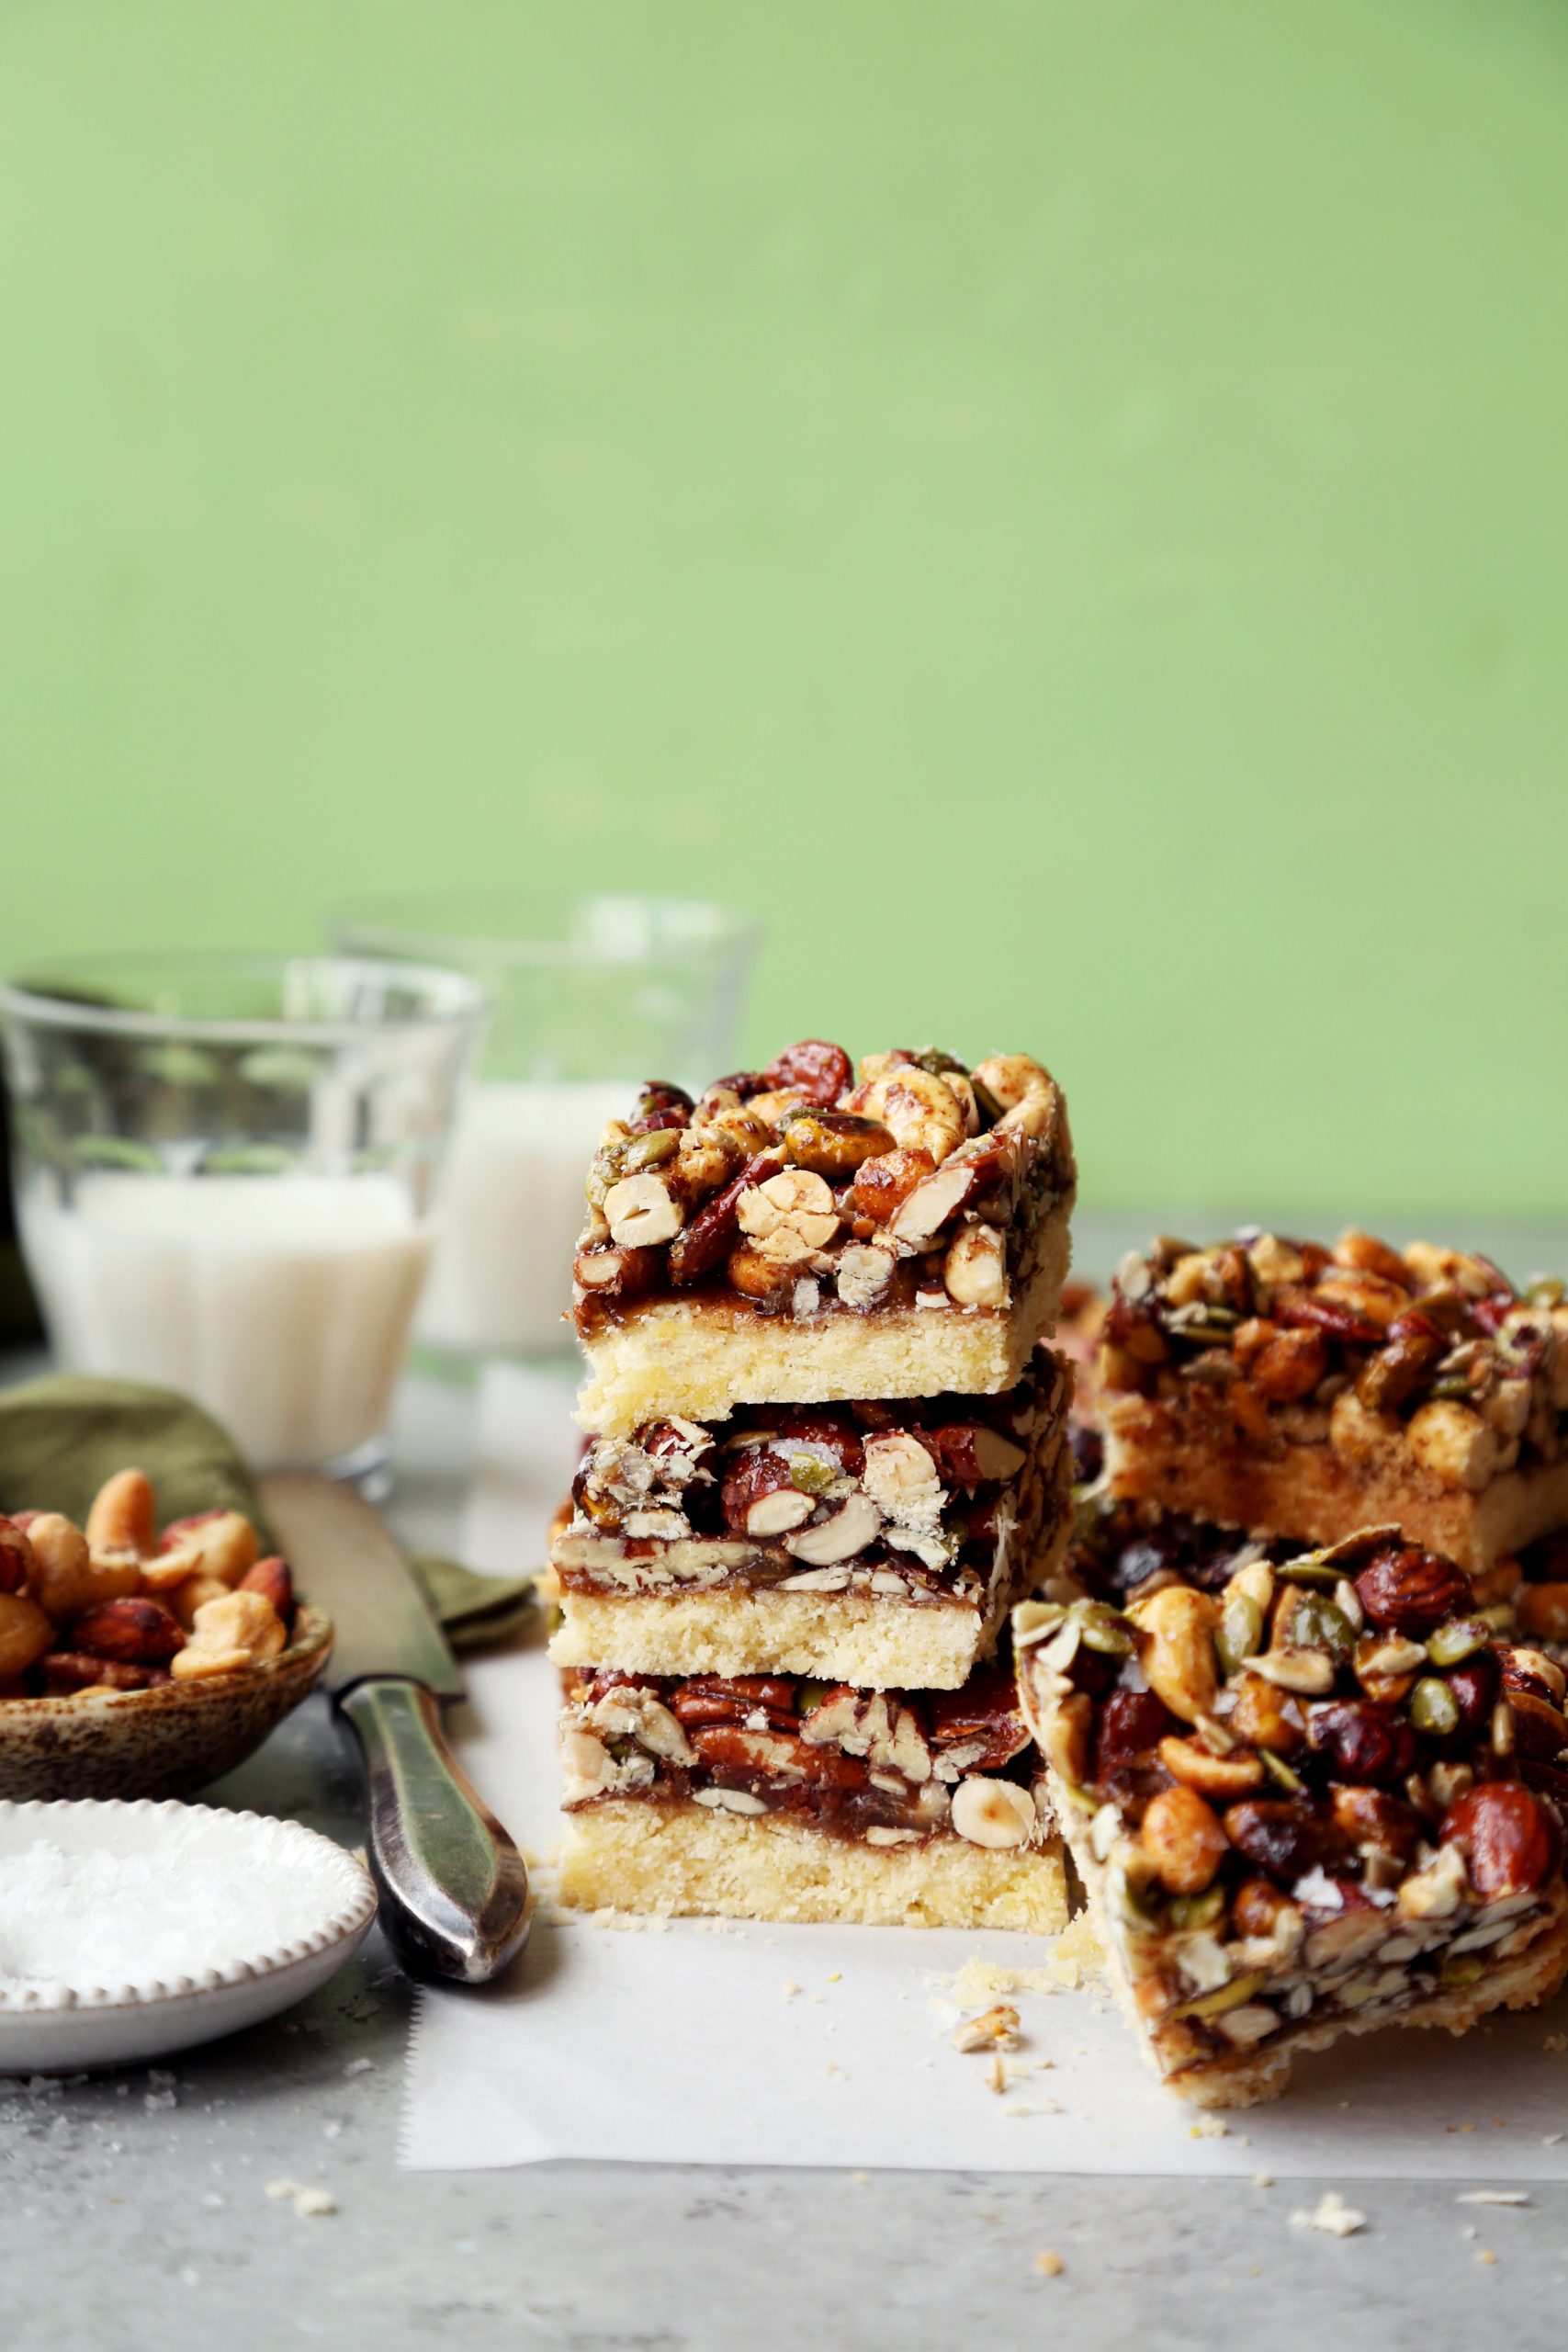 Nutty Shortbread Bars The Candid Appetite,Curdled Milk In Tea